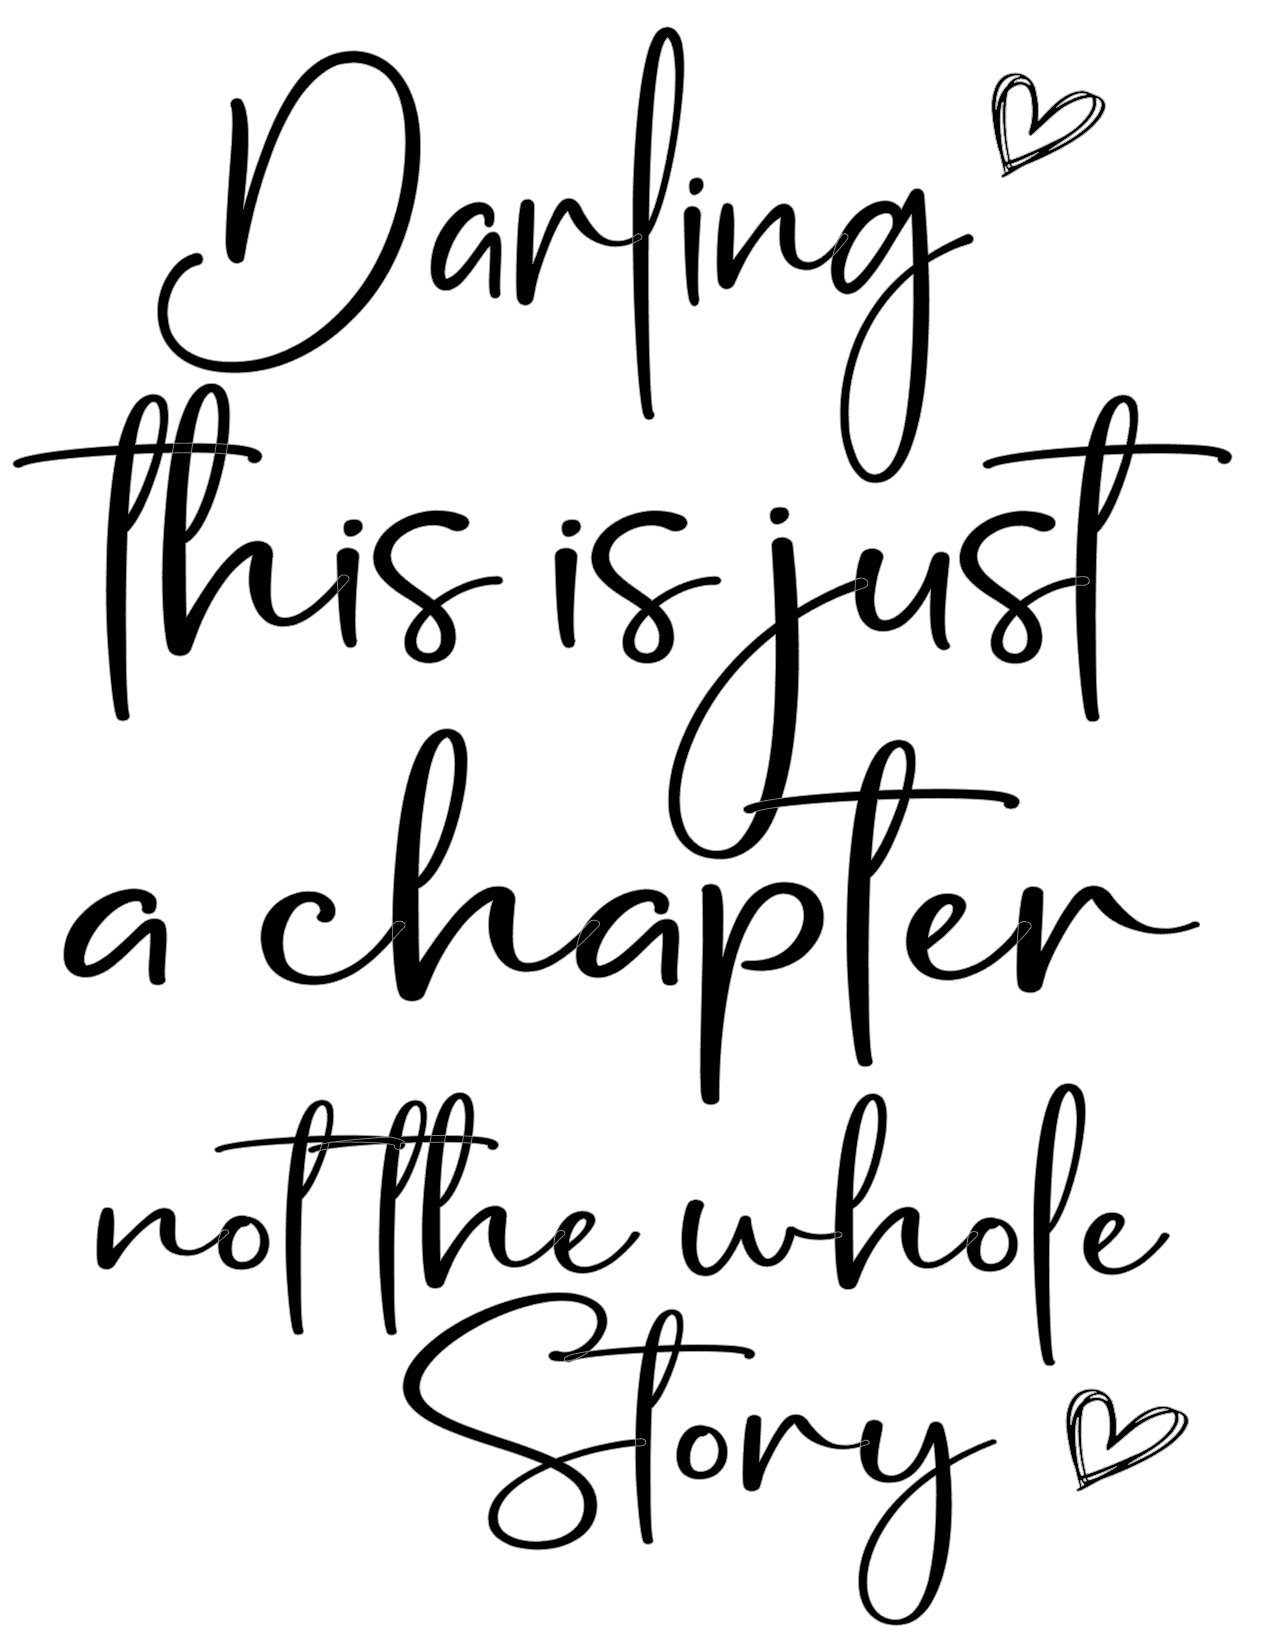 #234 Darling this is only a chapter, not the whole story